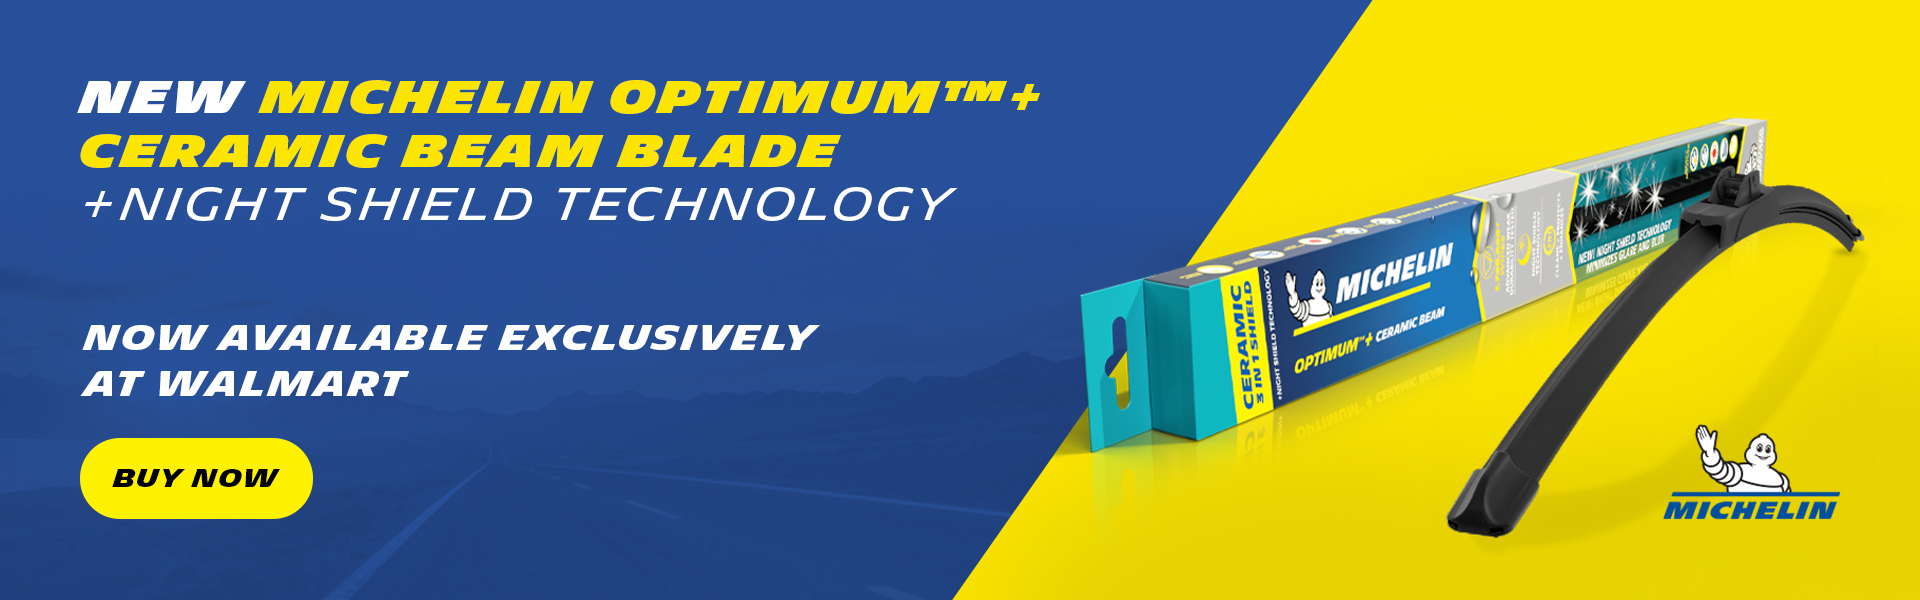 New MICHELIN Optimum+ ceramic beam blade. Now available at Walmart! Buy Now